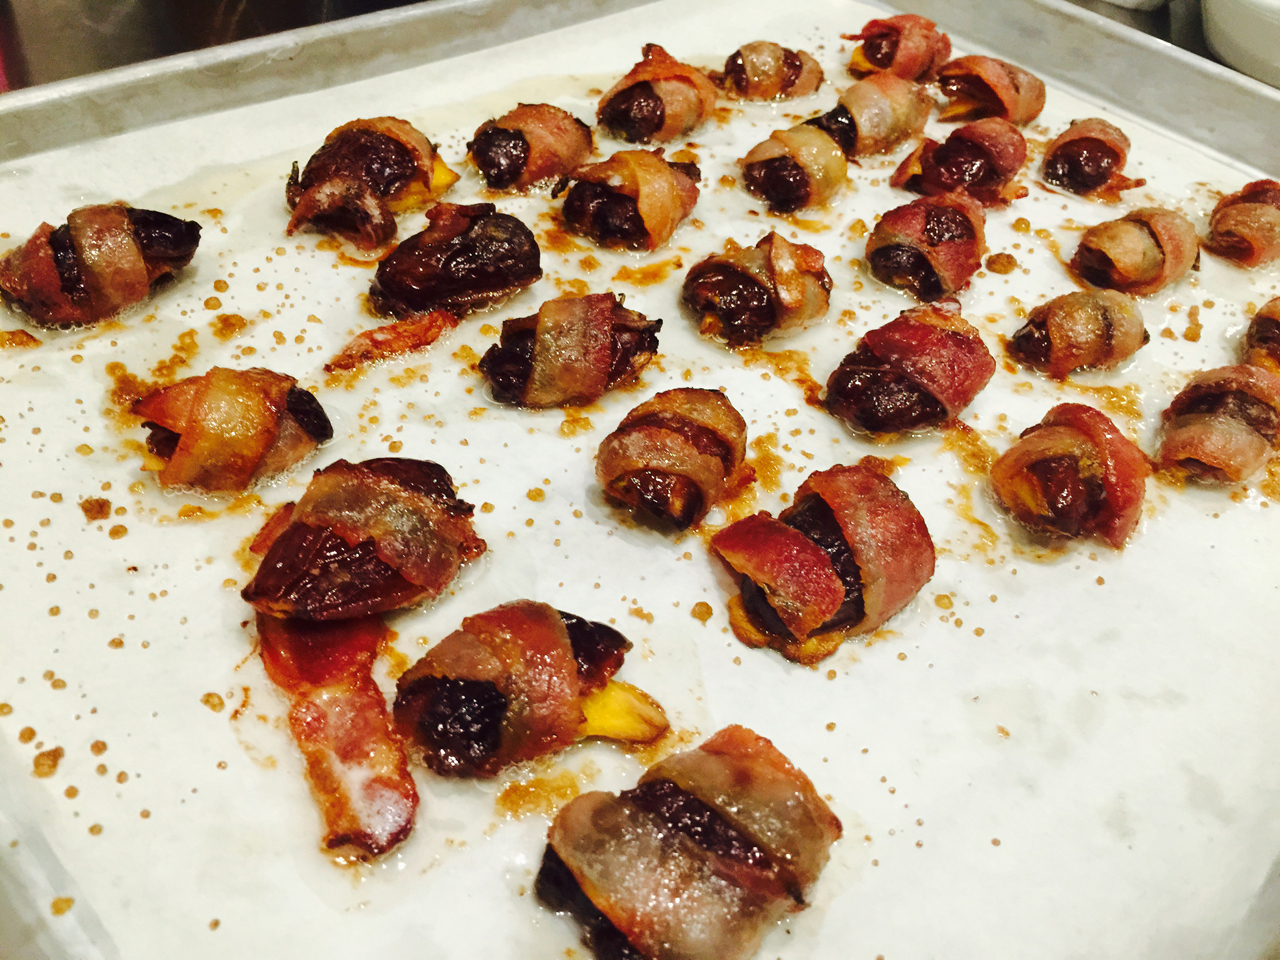 Chef Creighton Smith's Papaya-Stuffed Dates Wrapped in Bacon